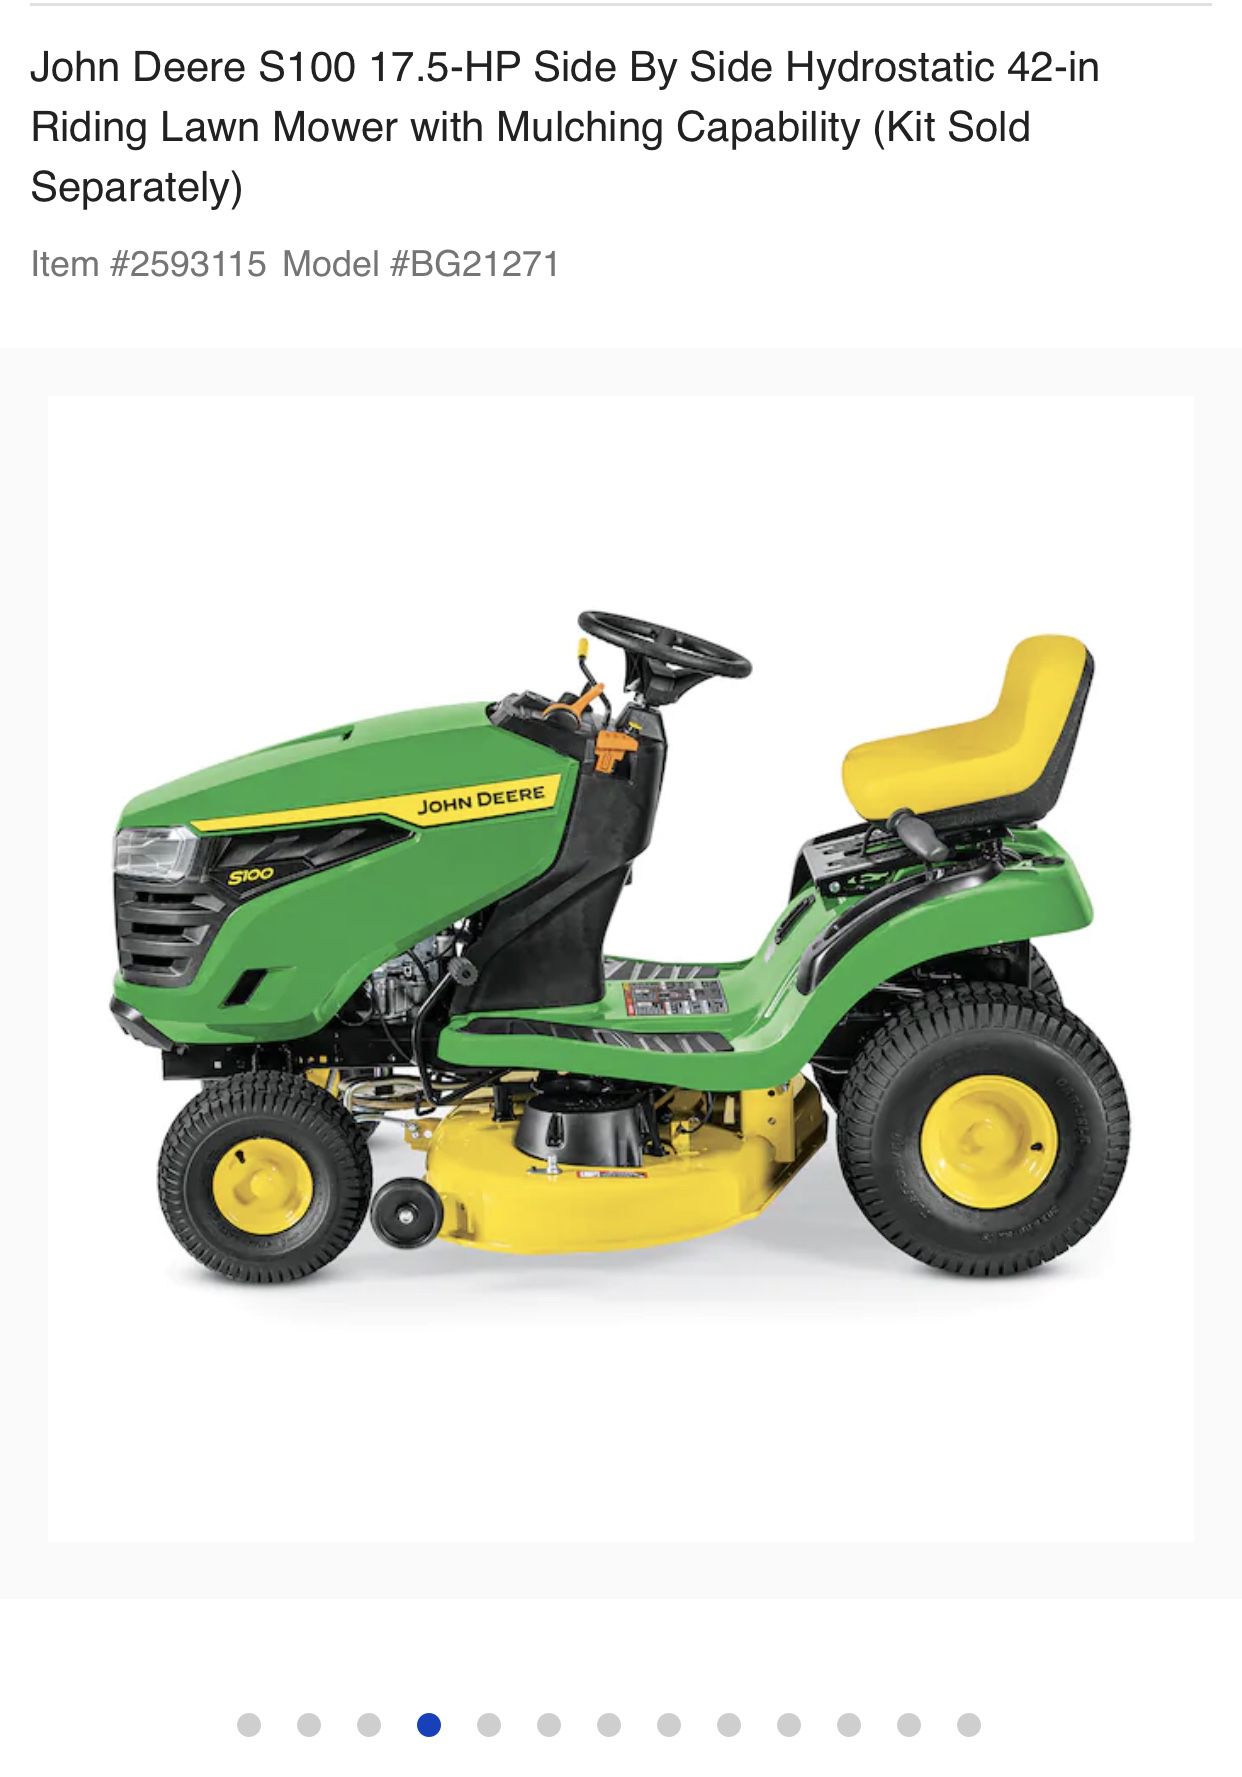 BRAND NEW John Deere S100 17.5-HP Side By Side Hydrostatic 42-in Riding Lawn Mower with Mulching Capability